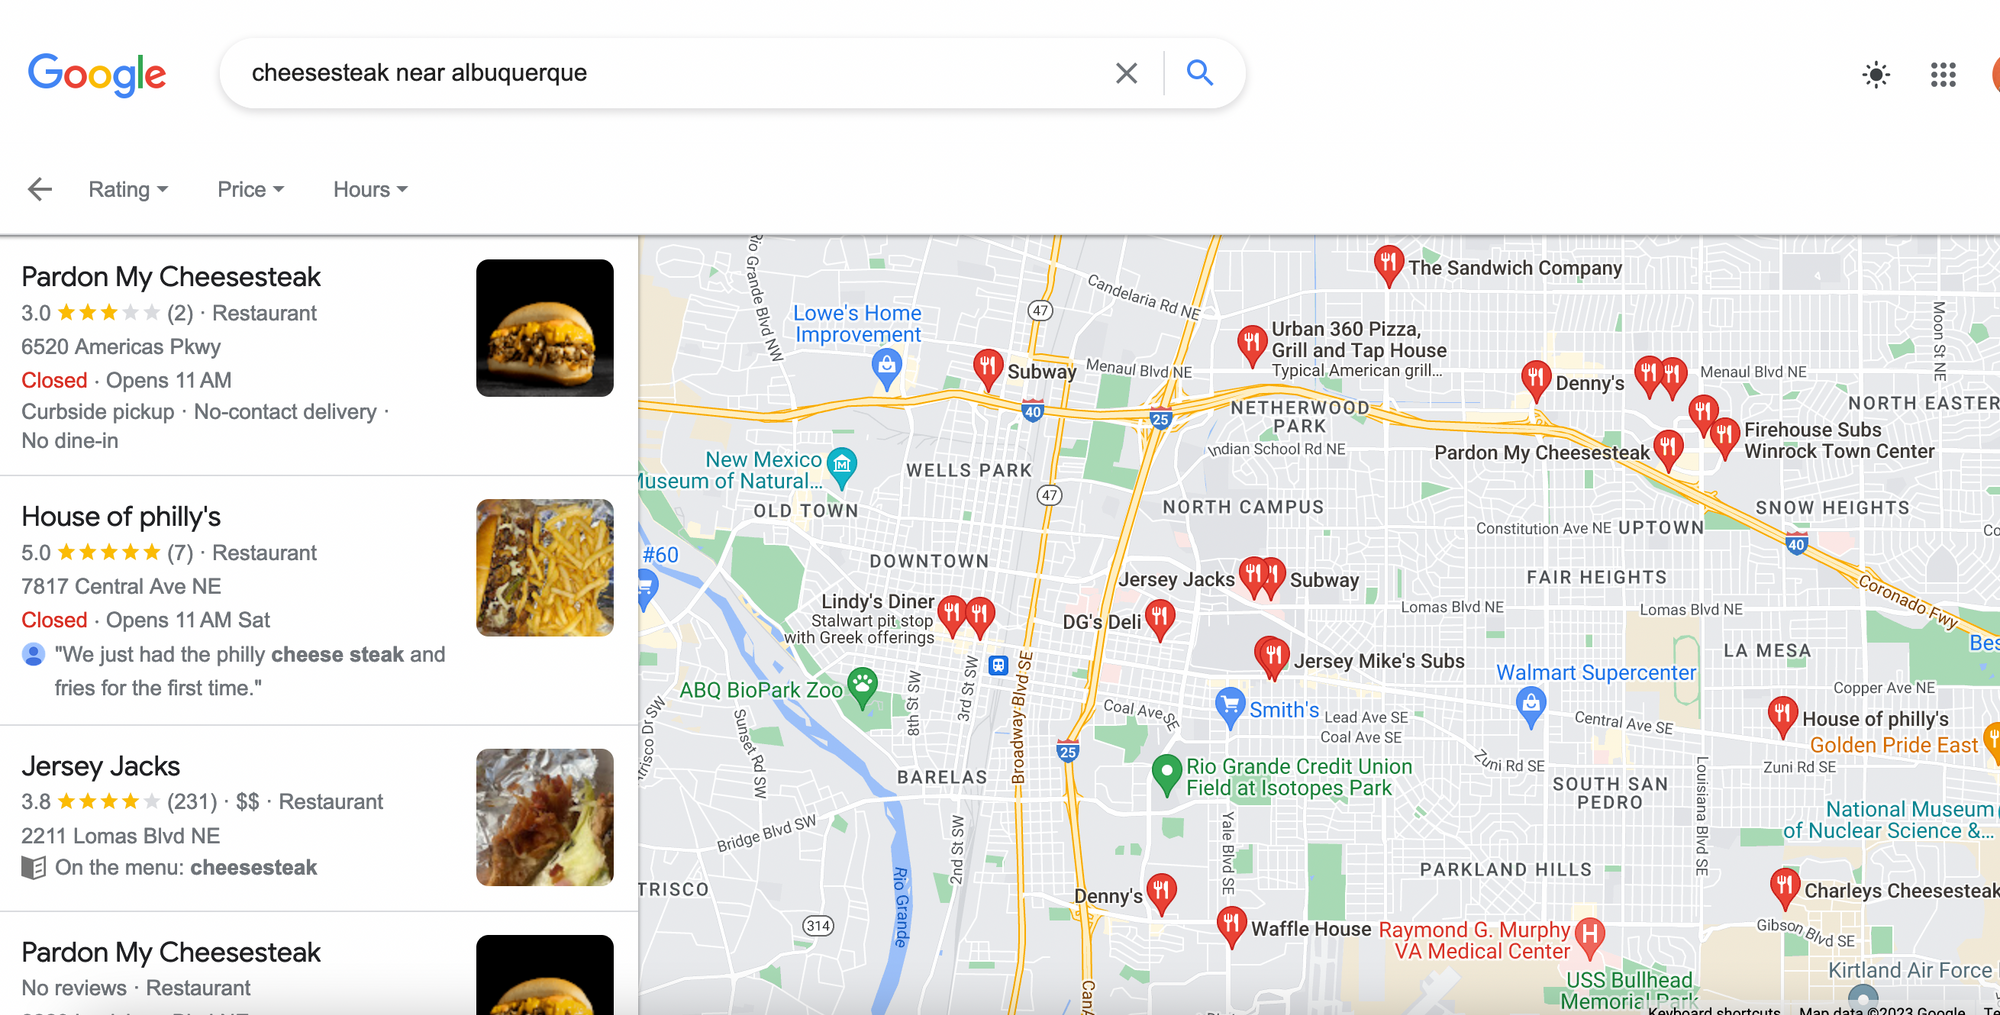 Google search results showing "cheesesteak near albuquerque," with results that include virtual brand Pardon my Cheesesteak